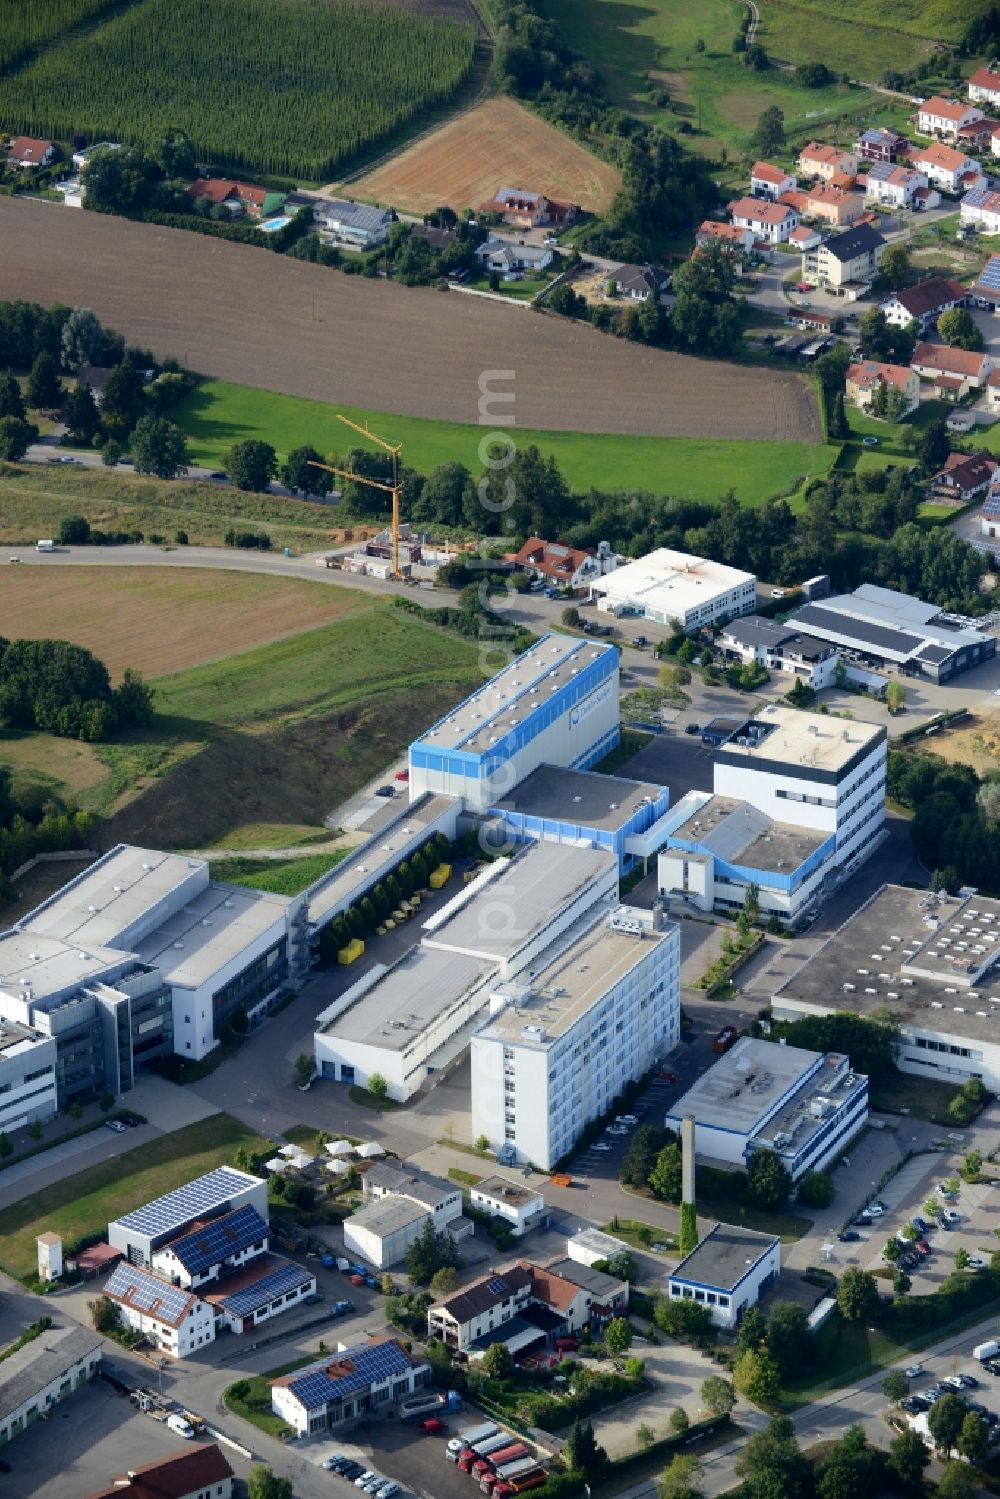 Pfaffenhofen from the bird's eye view: Company grounds and facilities of the pharmaceutical company Daiichi-Sankyo in Pfaffenhofen in the state of Bavaria